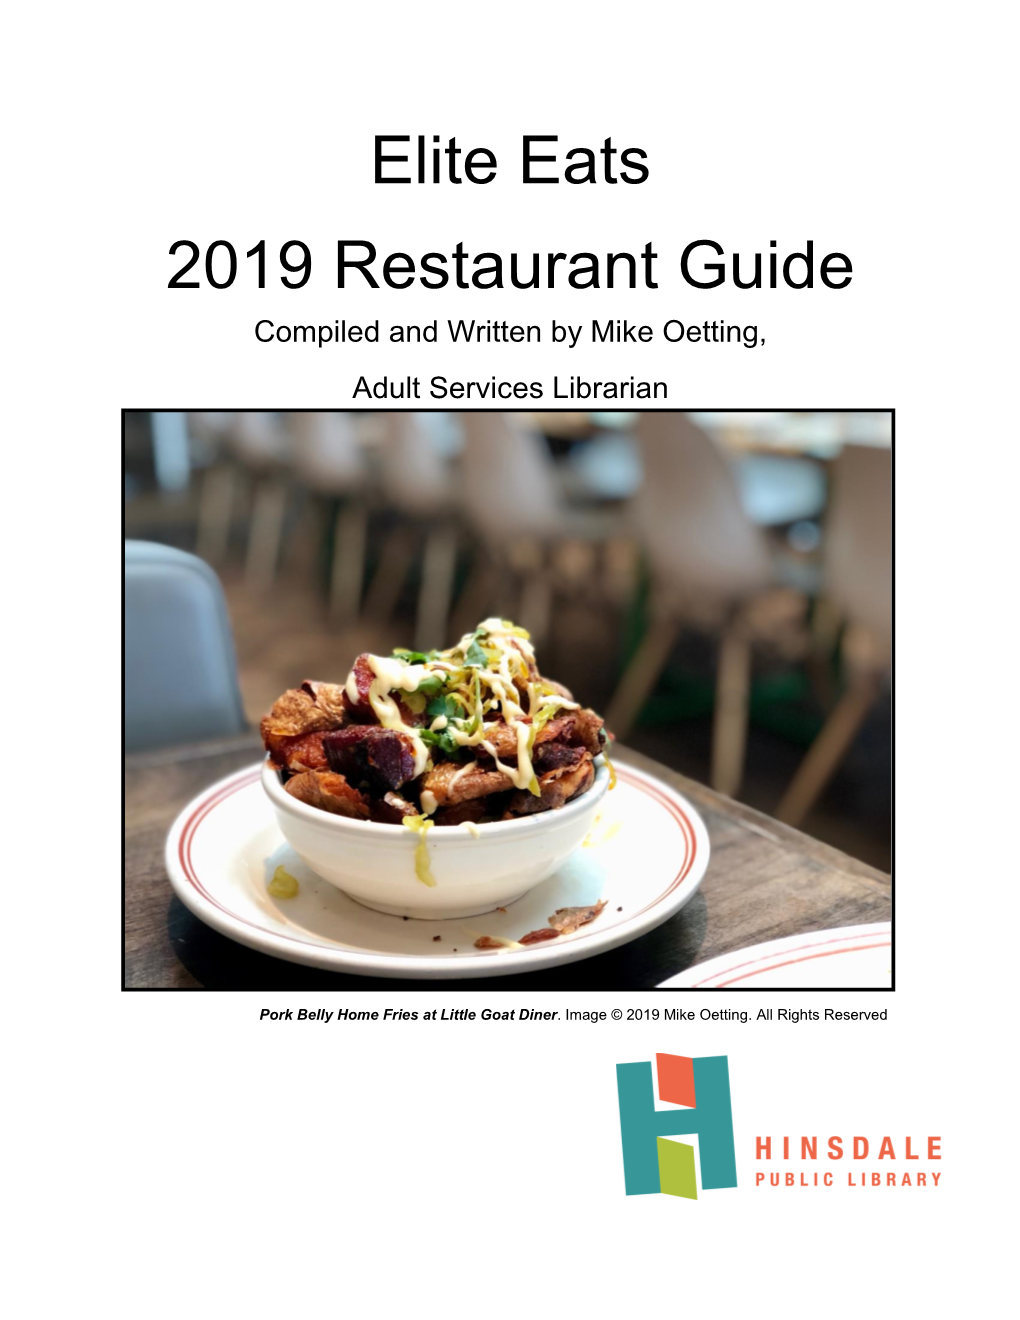 Elite Eats 2019 Restaurant Guide Compiled and Written by Mike Oetting